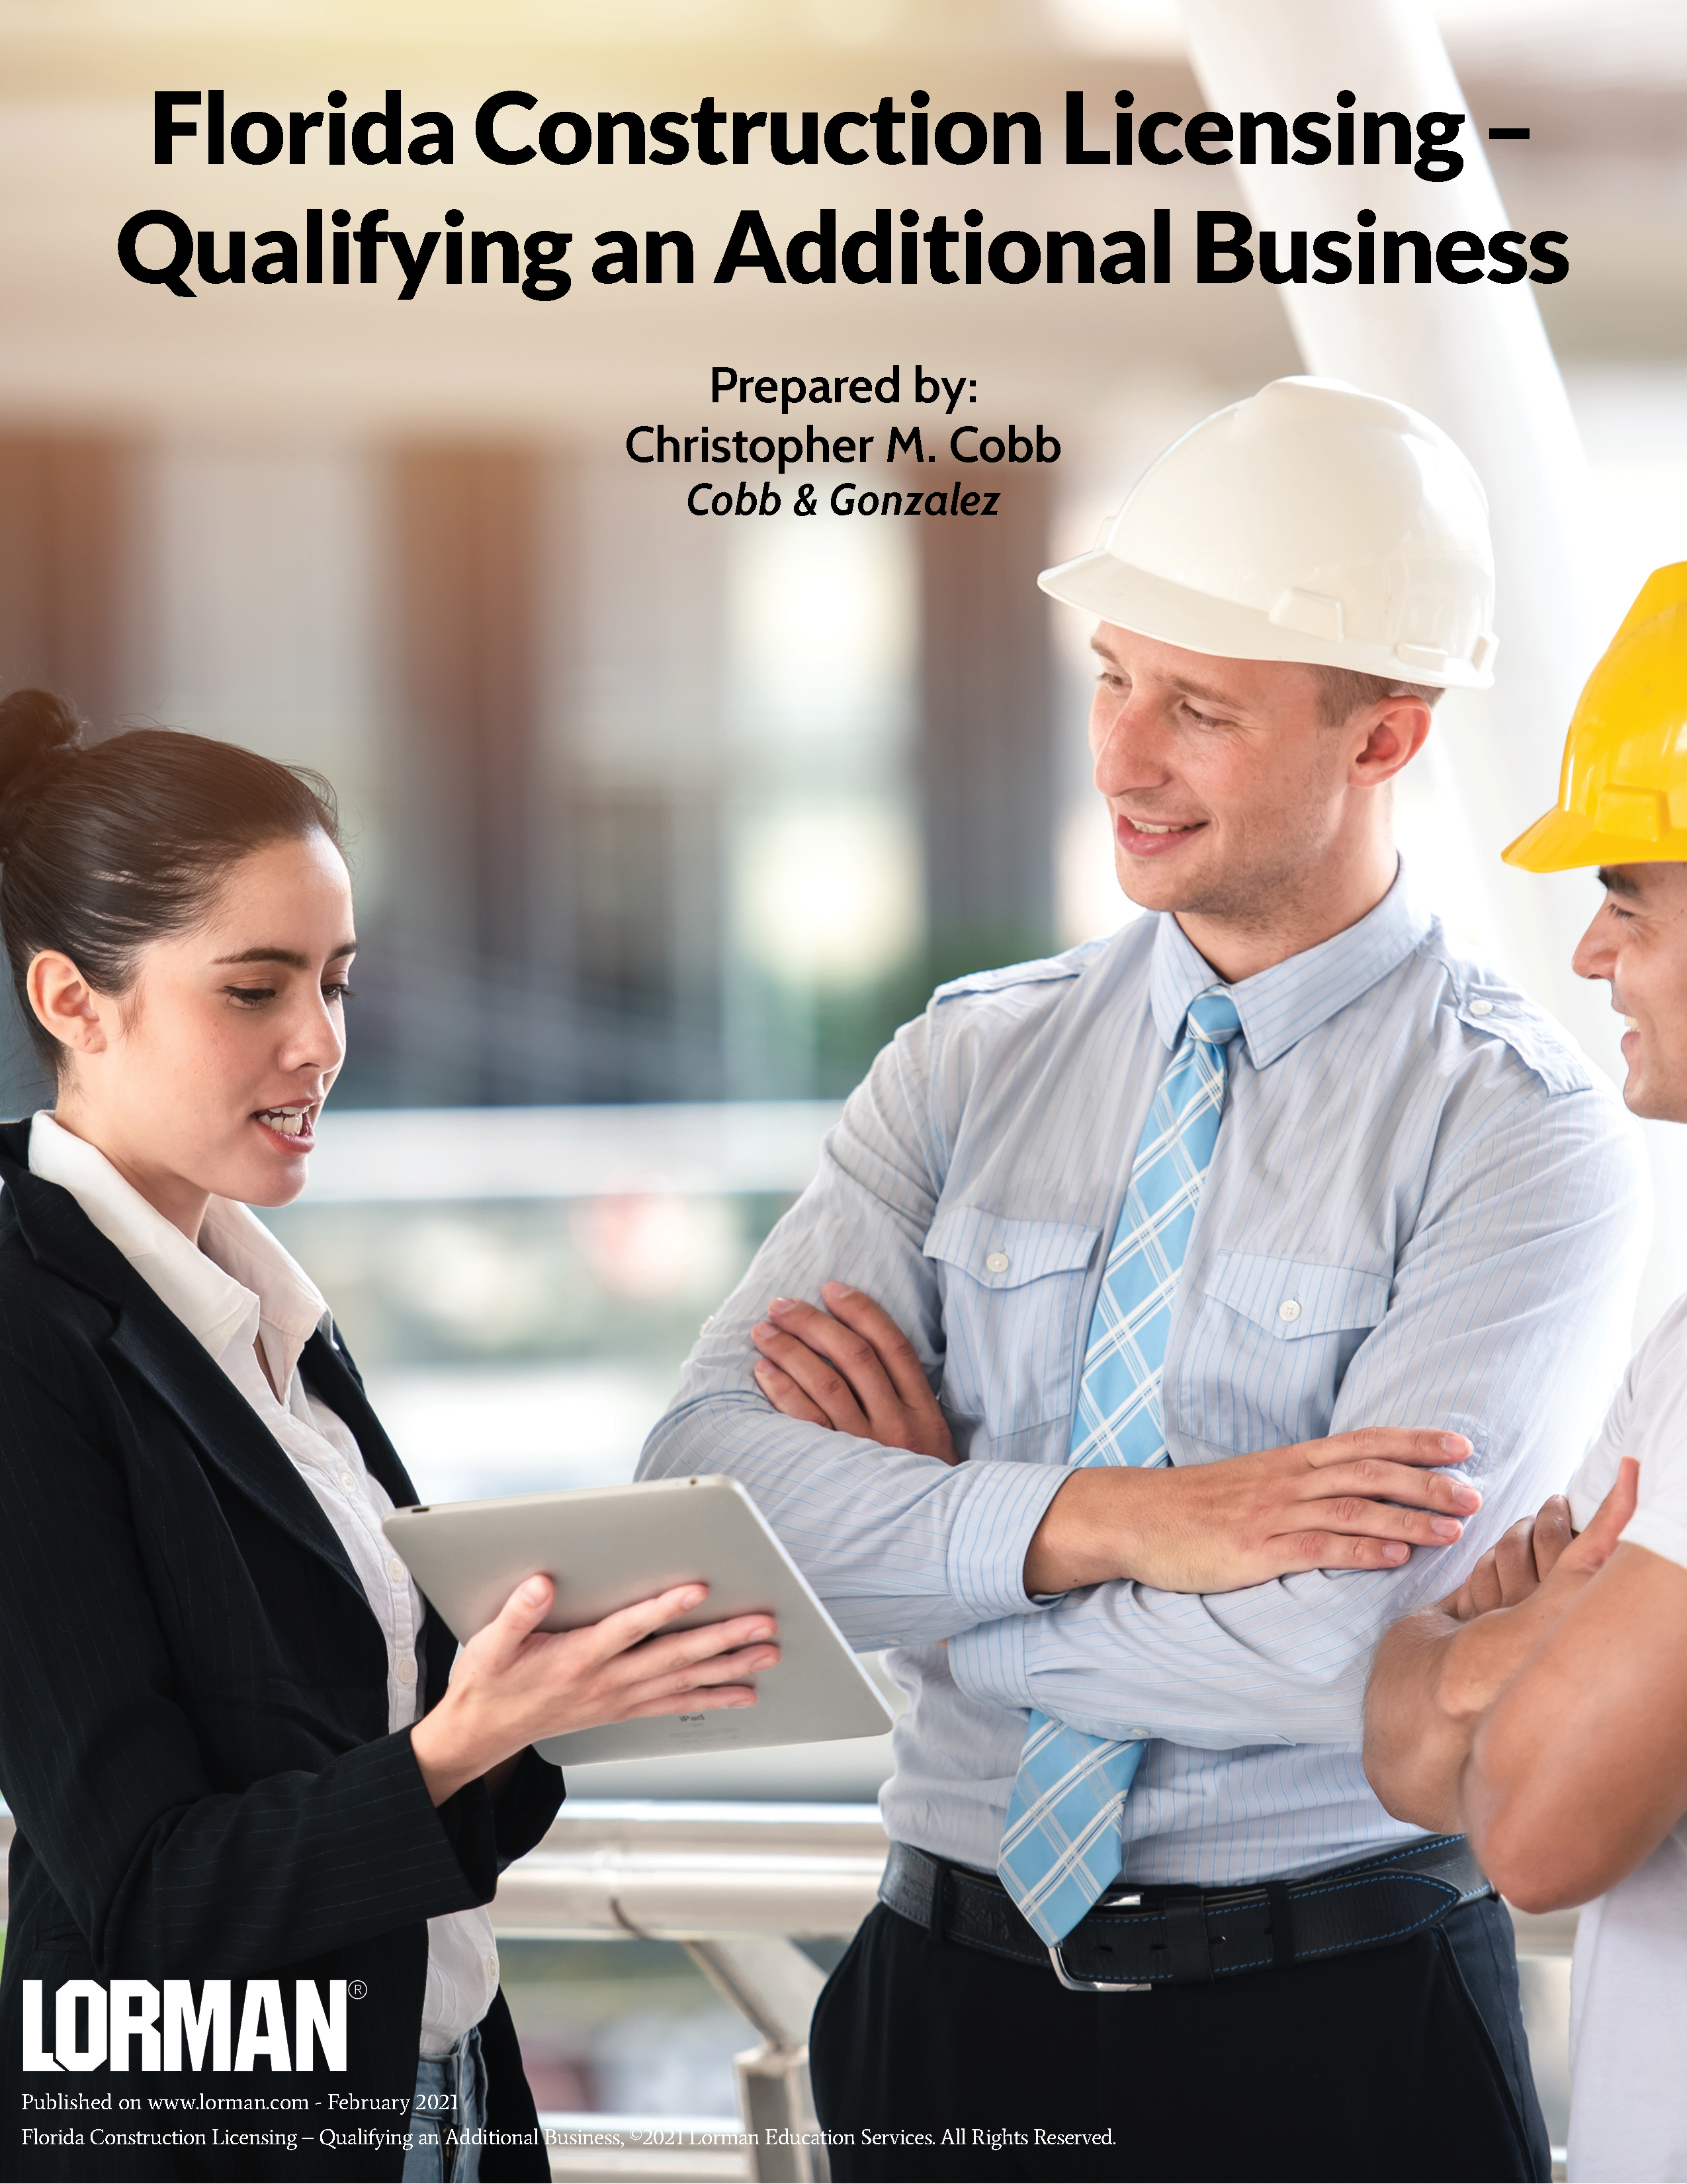 Florida Construction Licensing - Qualifying an Additional Business